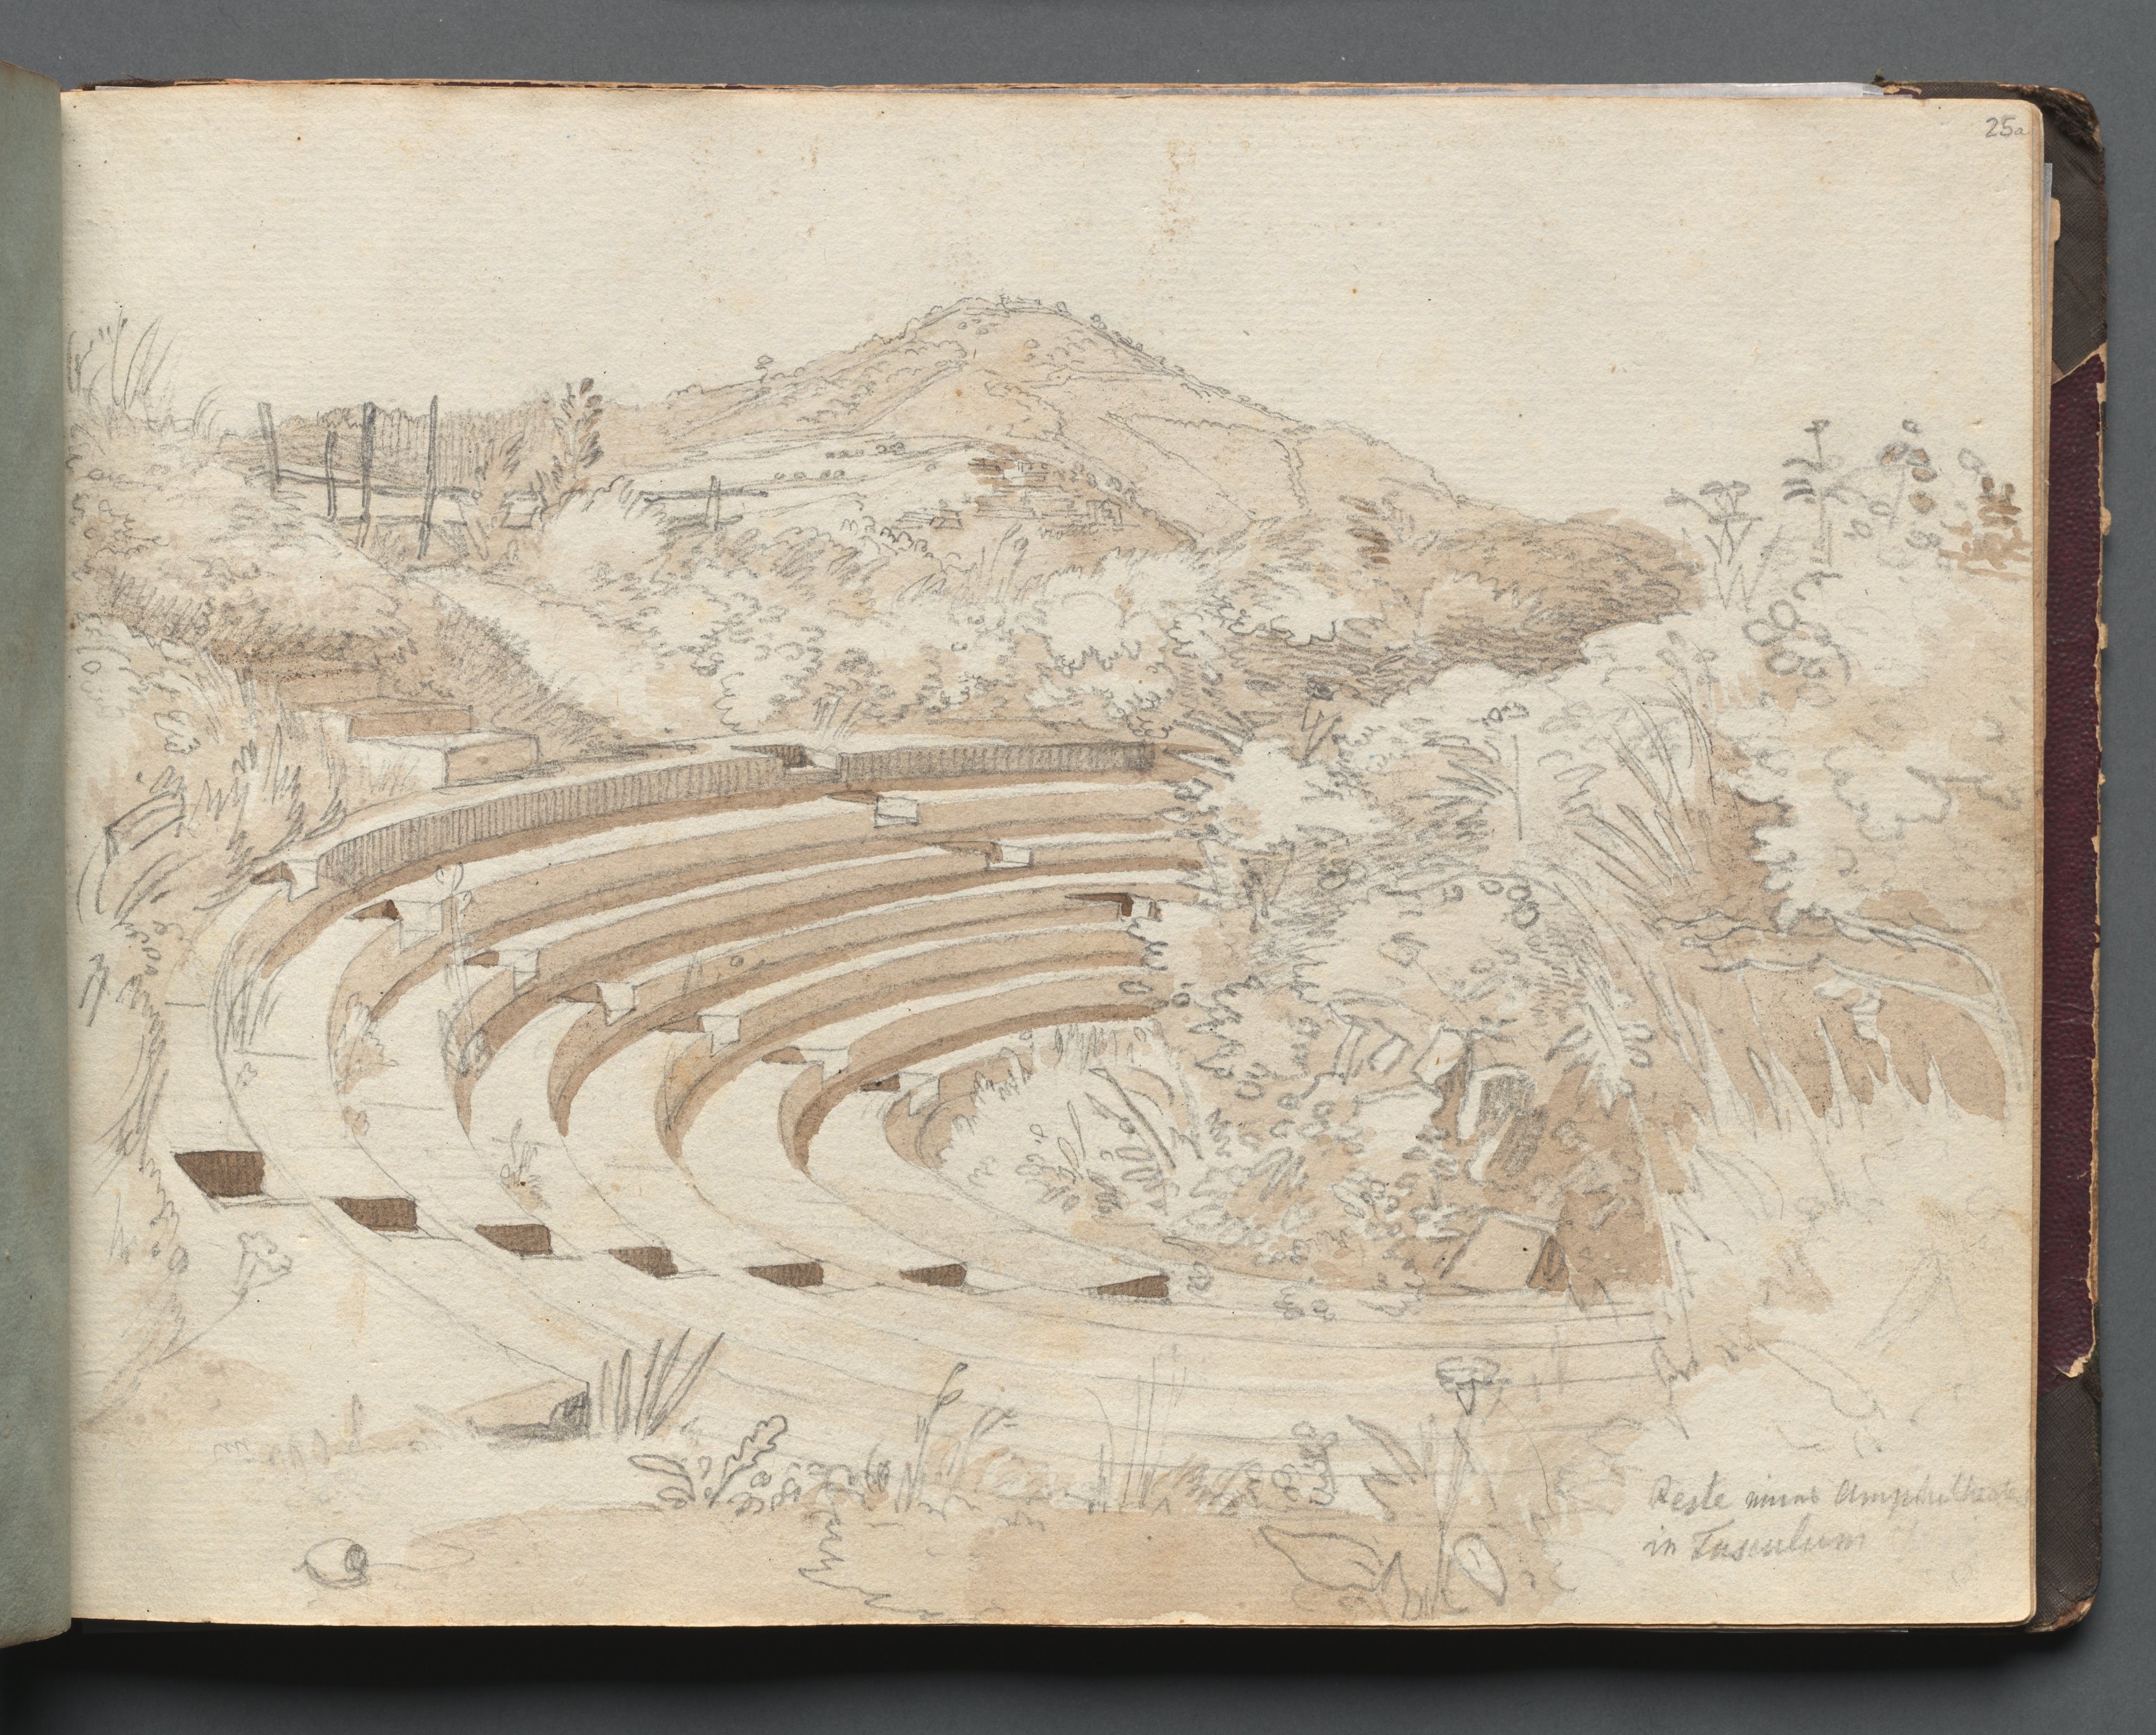 Album with Views of Rome and Surroundings, Landscape Studies, page 25a: Amphitheater, Tusculum